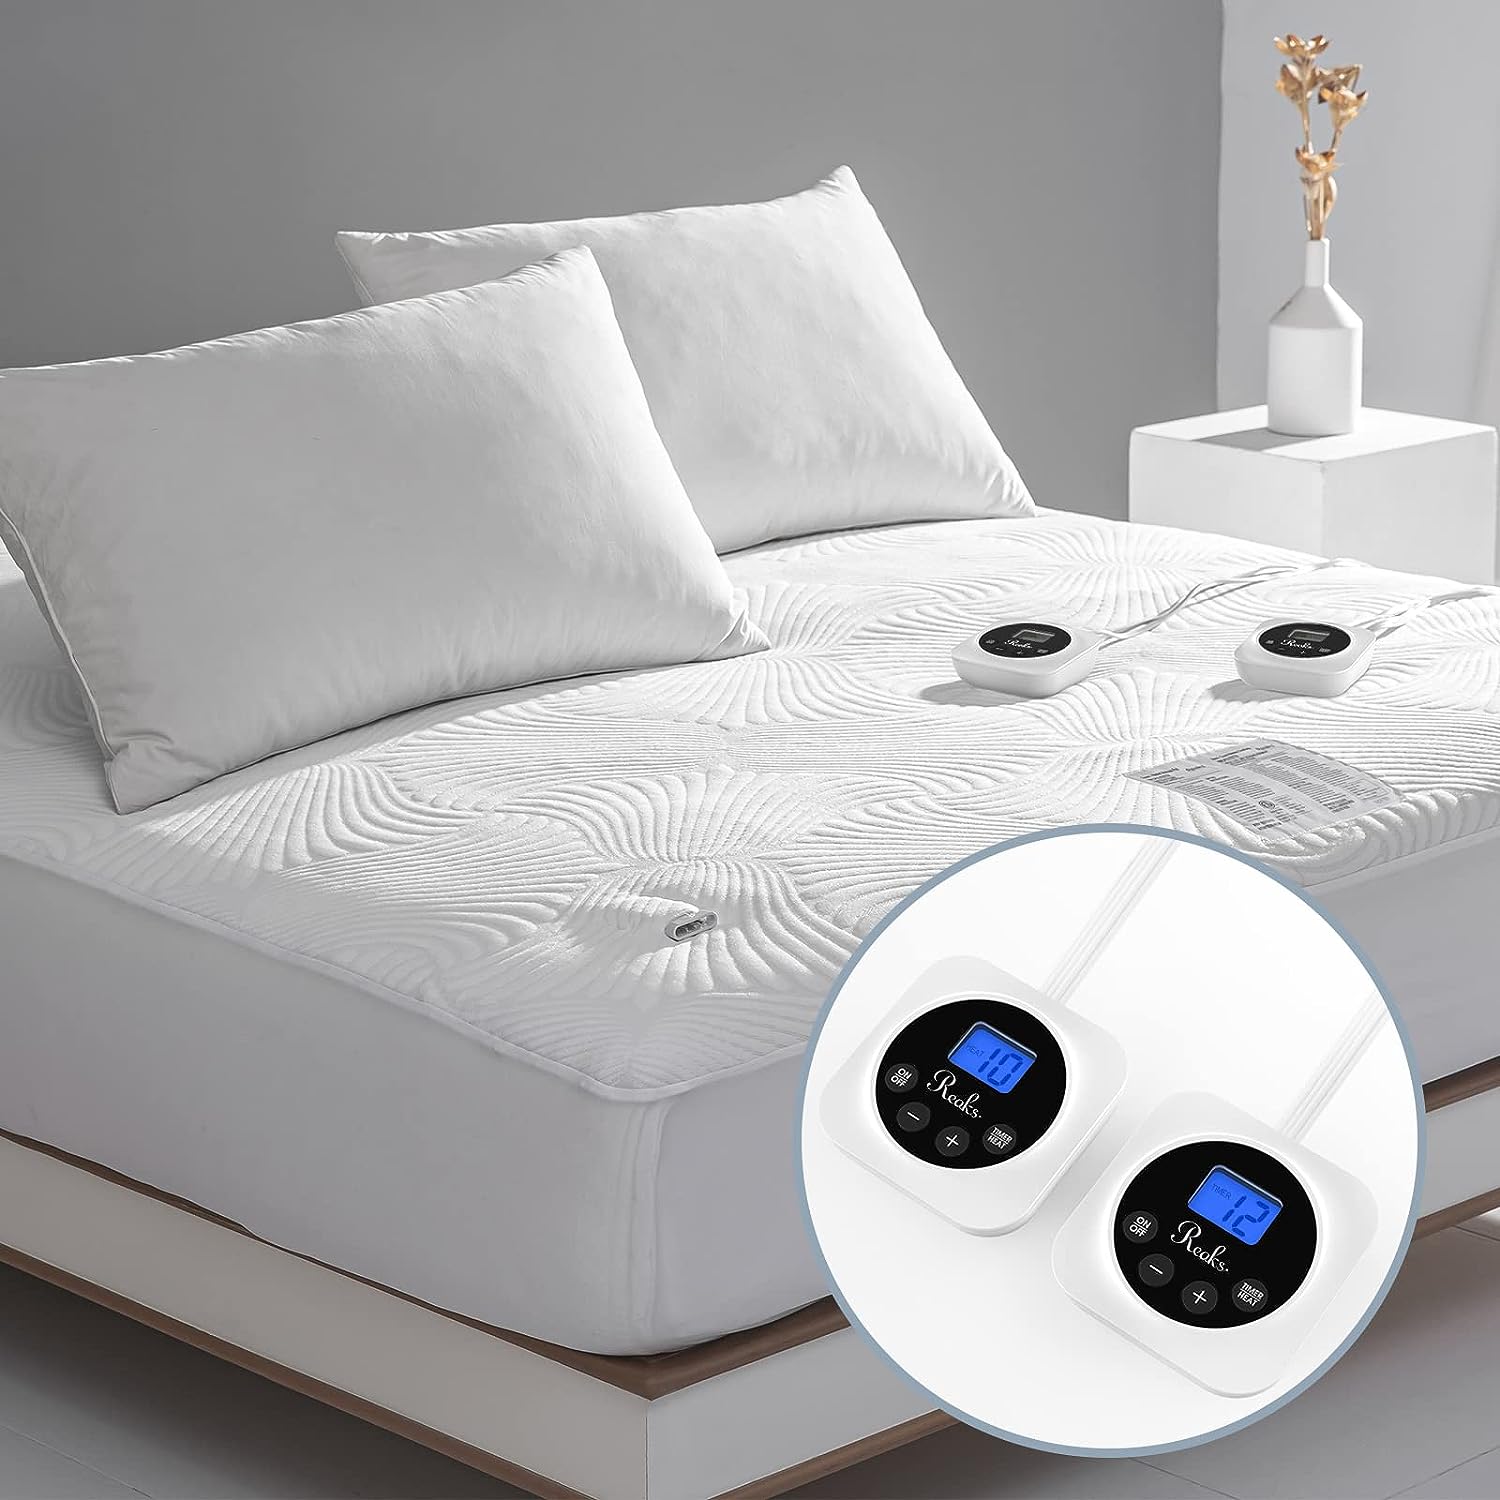 King Size Electric Zoned Heated Mattress Pad Cover [...]